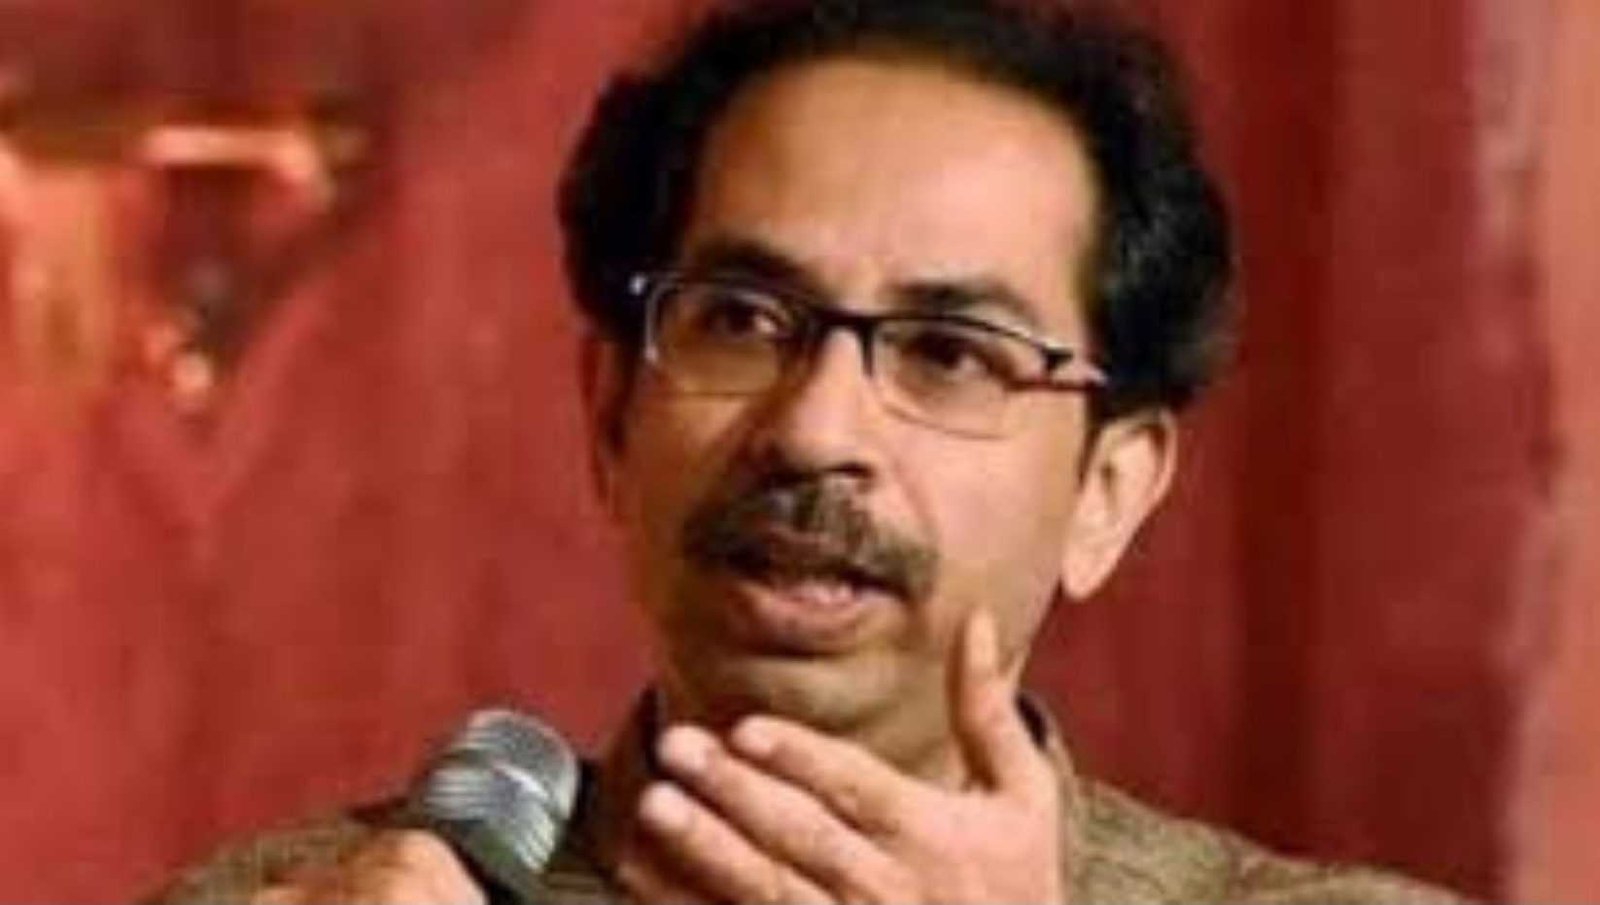 उद्धव ठाकरे | No need for bouquets and hoardings on birthday, spend money for social activities - Uddhav Thackeray